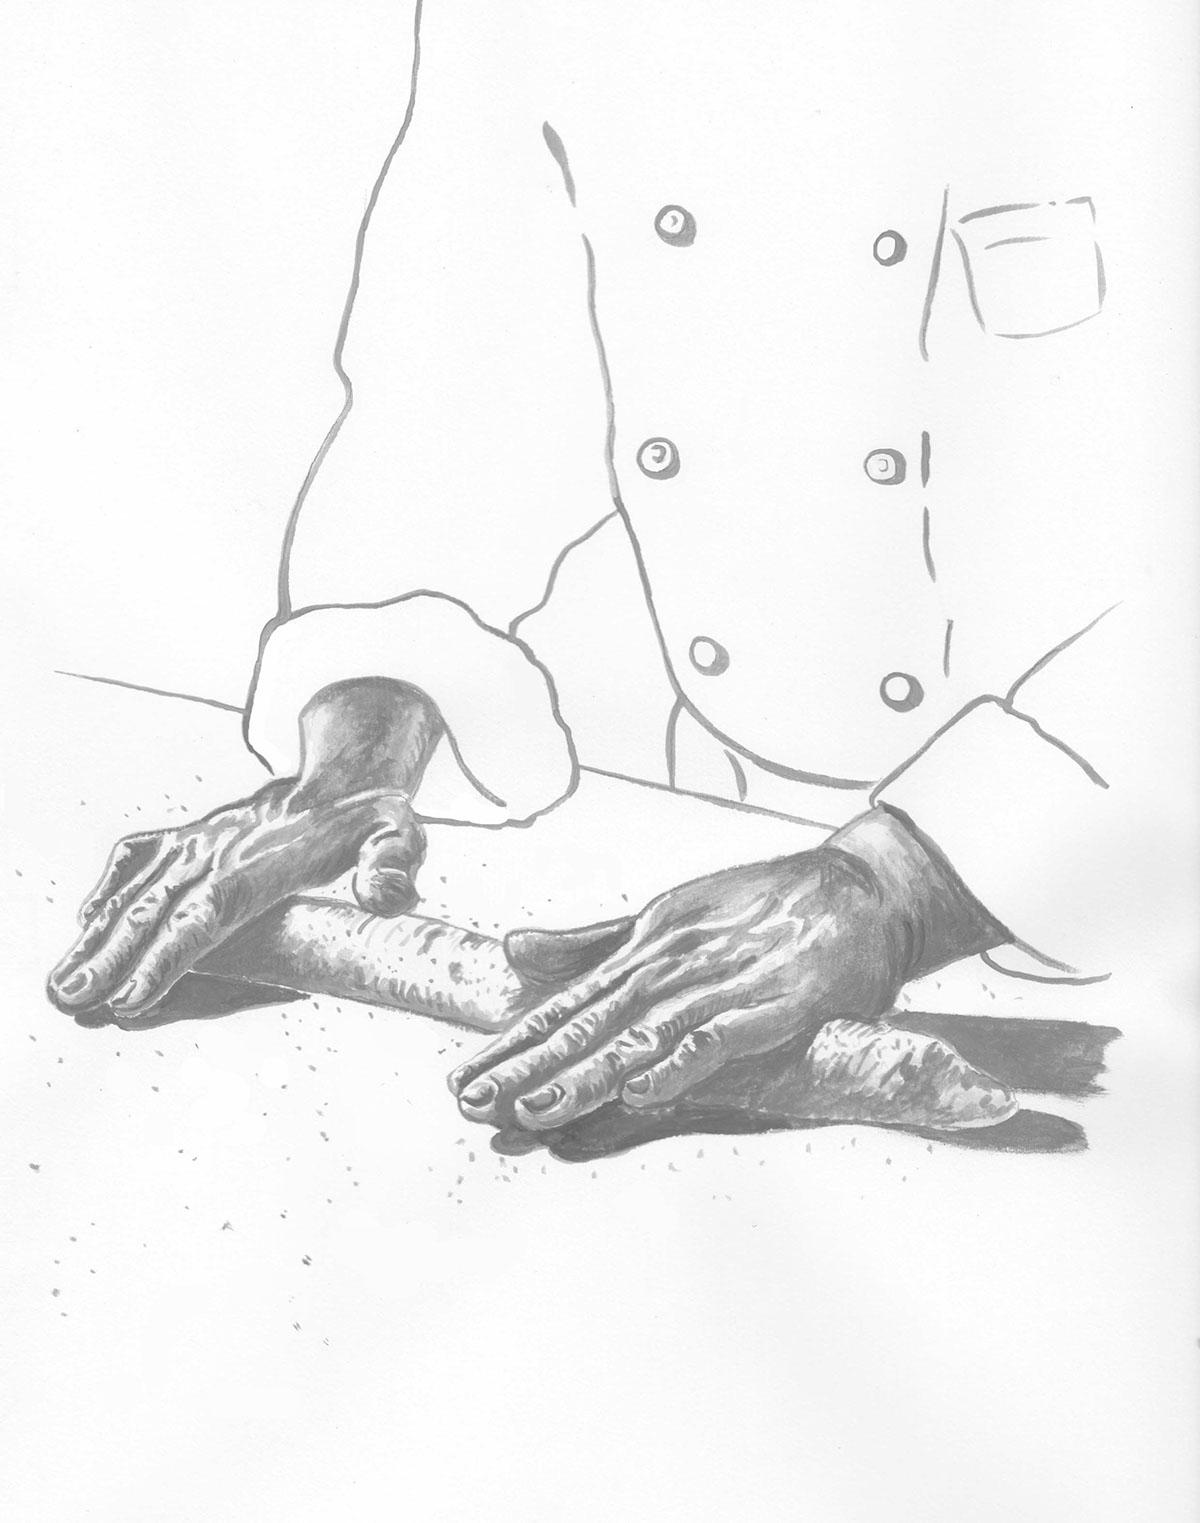 cook Cook Book illustration cook bread chef KITCHEN ILLUSTRATION food illustration Food 